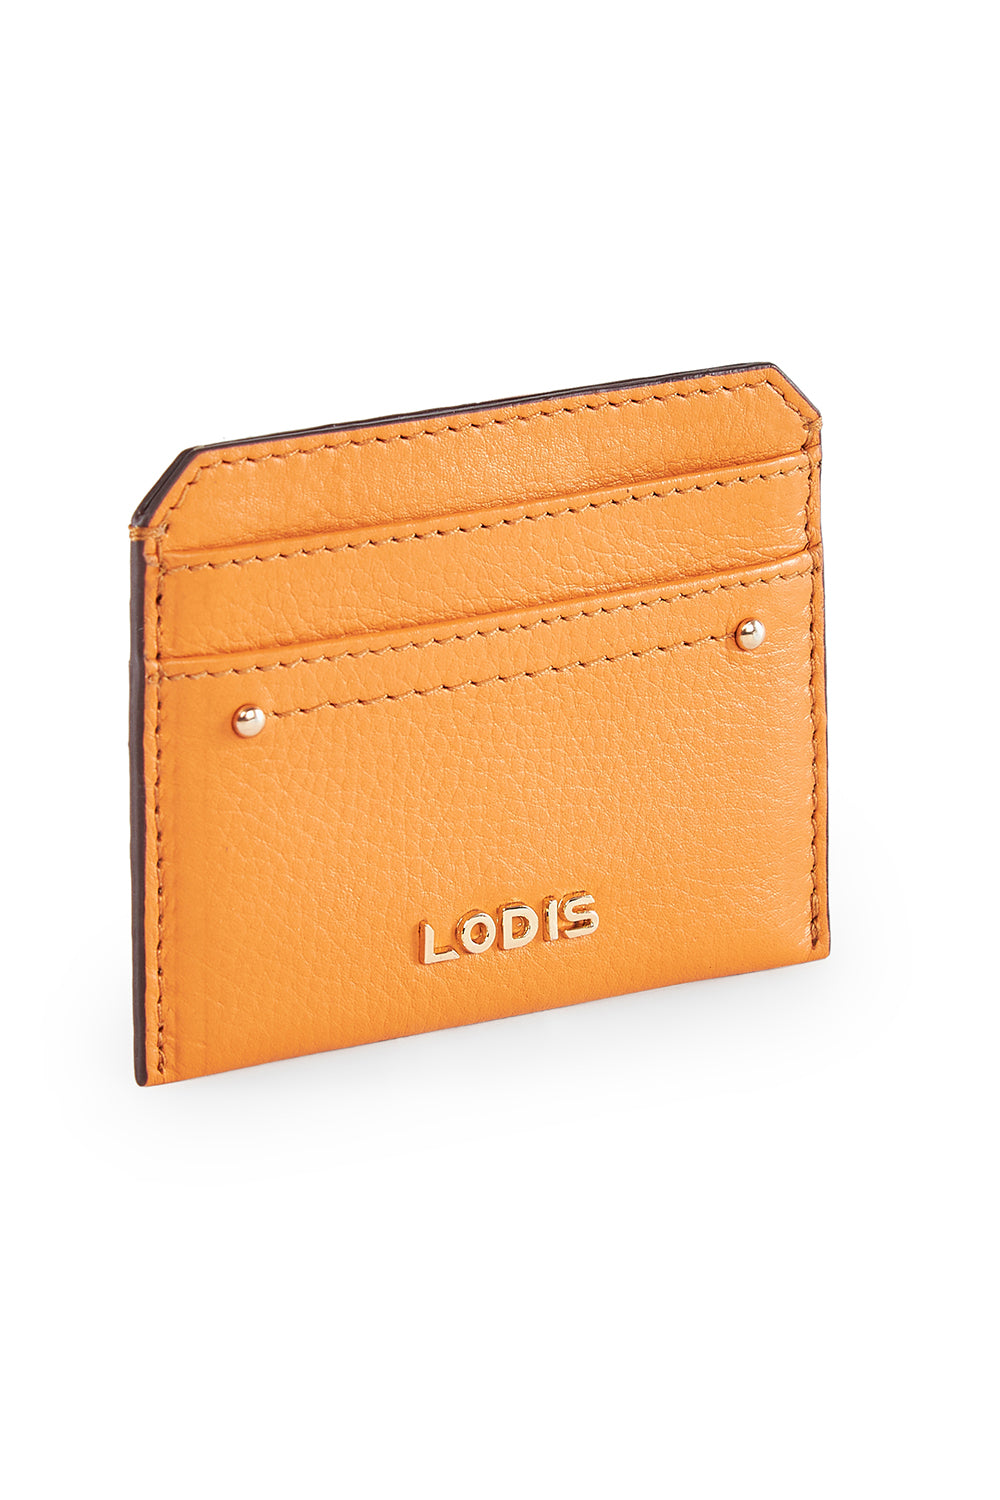 Shop Now & Upgrade Your Everyday Style with Flynn Card Case | Lodis 